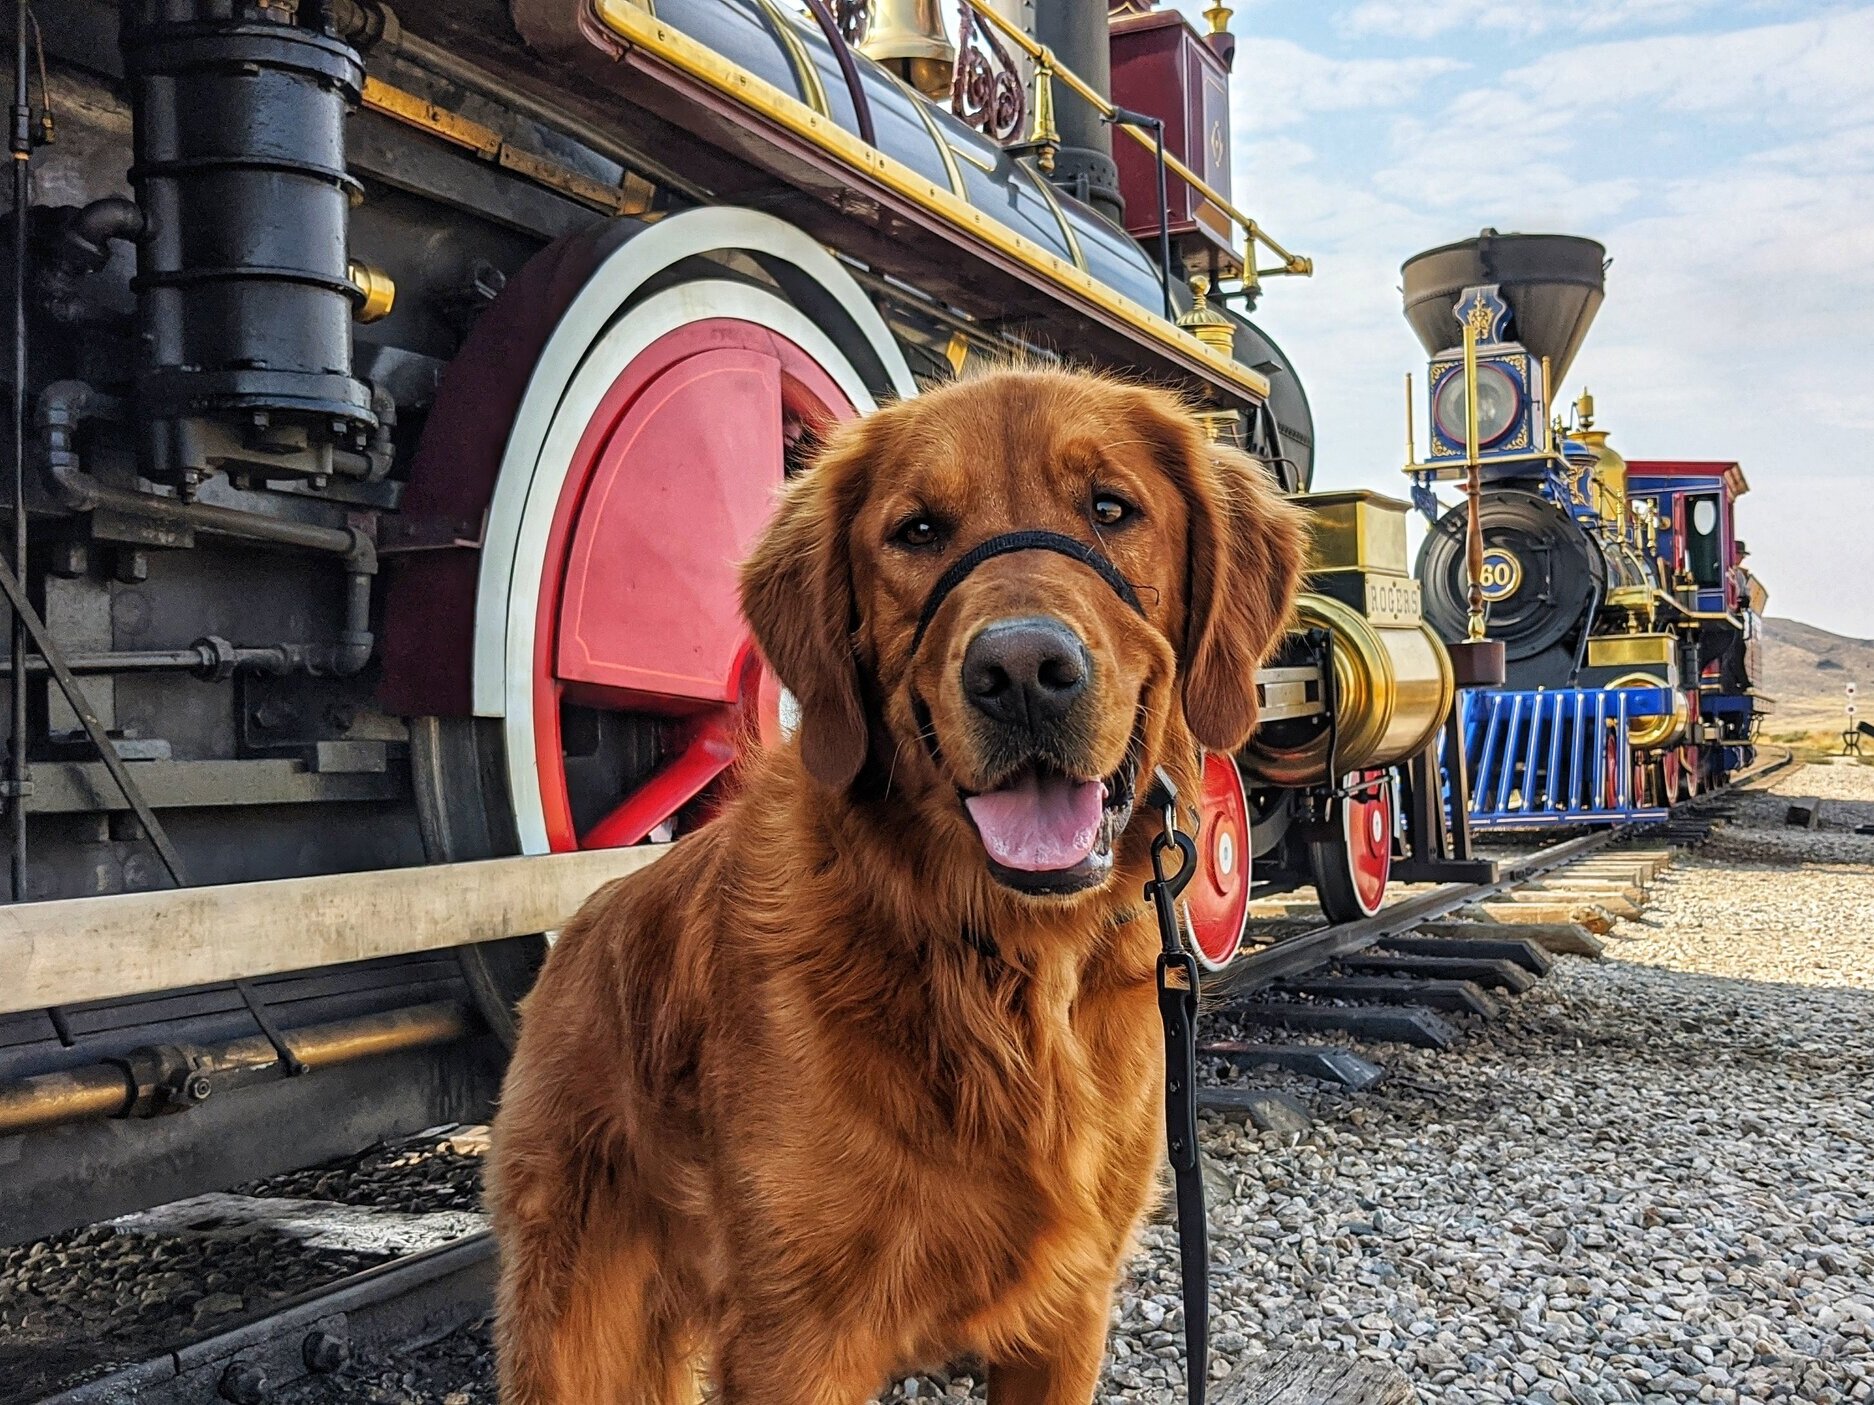 Scout smiles close to the camera in front of two vintage steam locomotives